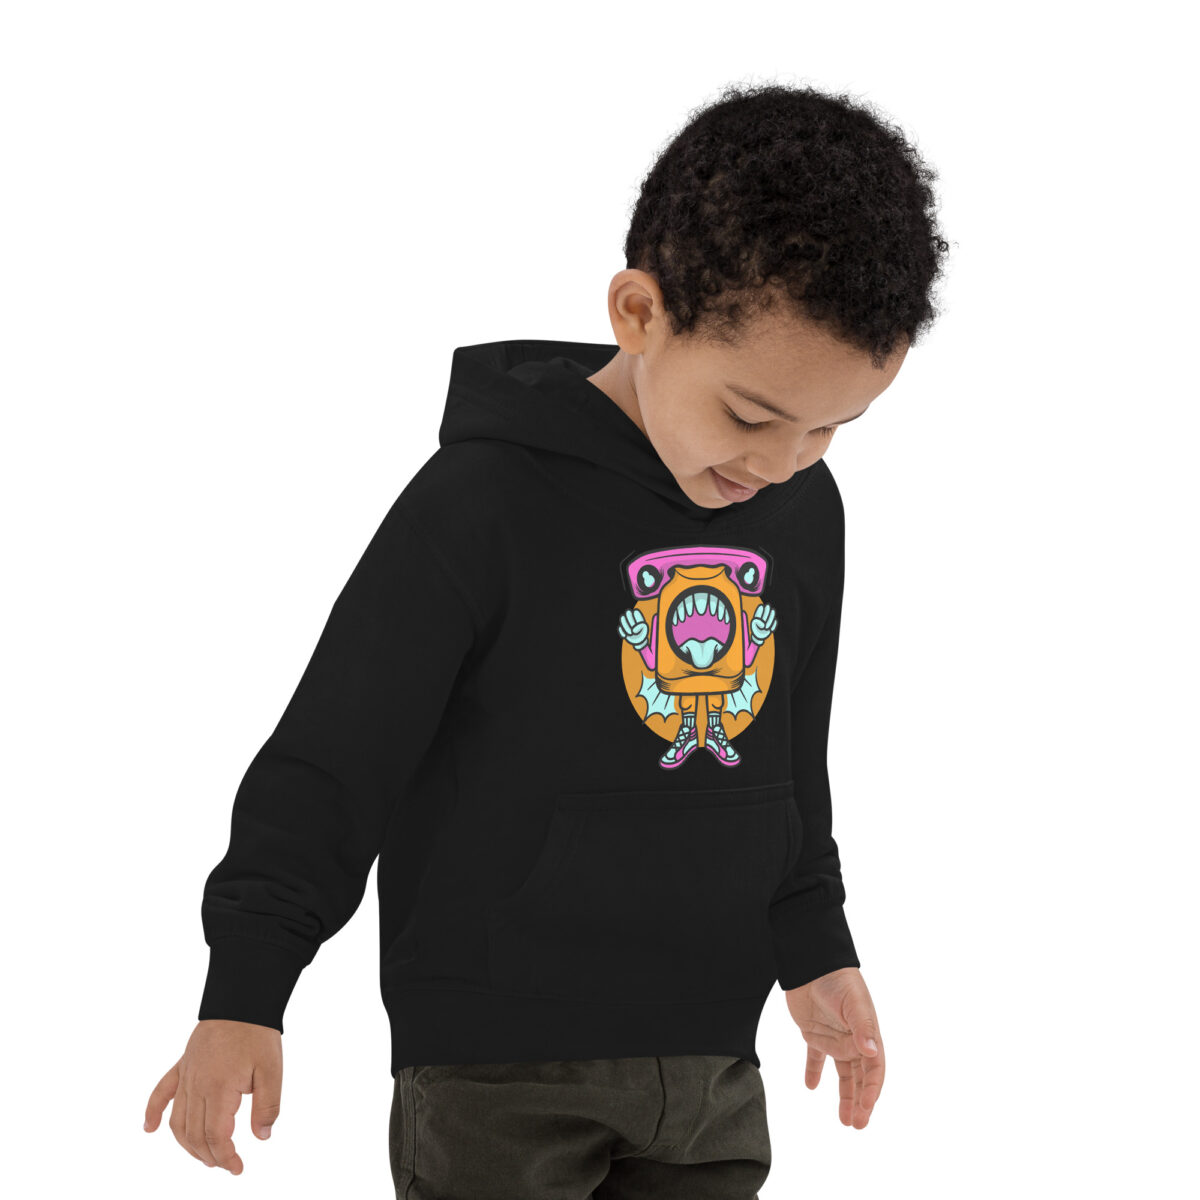 kids hoodie jet black right front 6475bfe7399e8